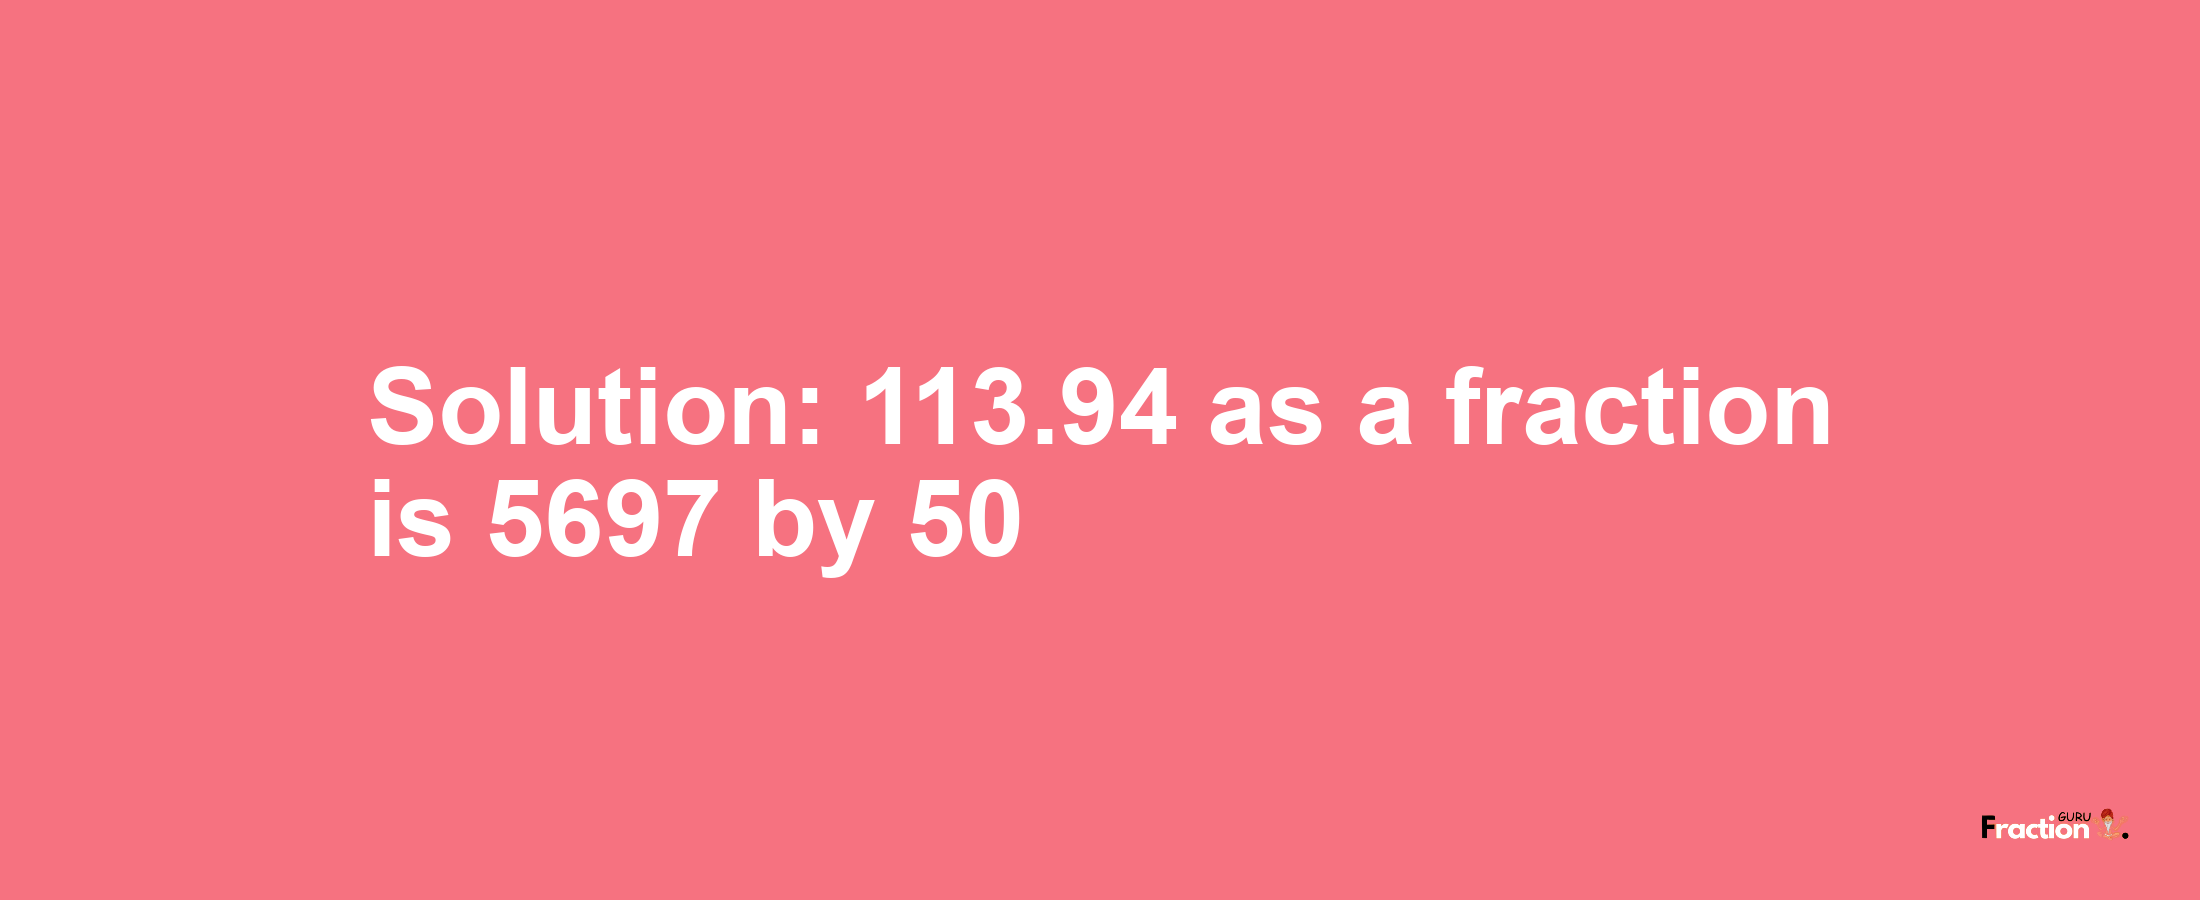 Solution:113.94 as a fraction is 5697/50